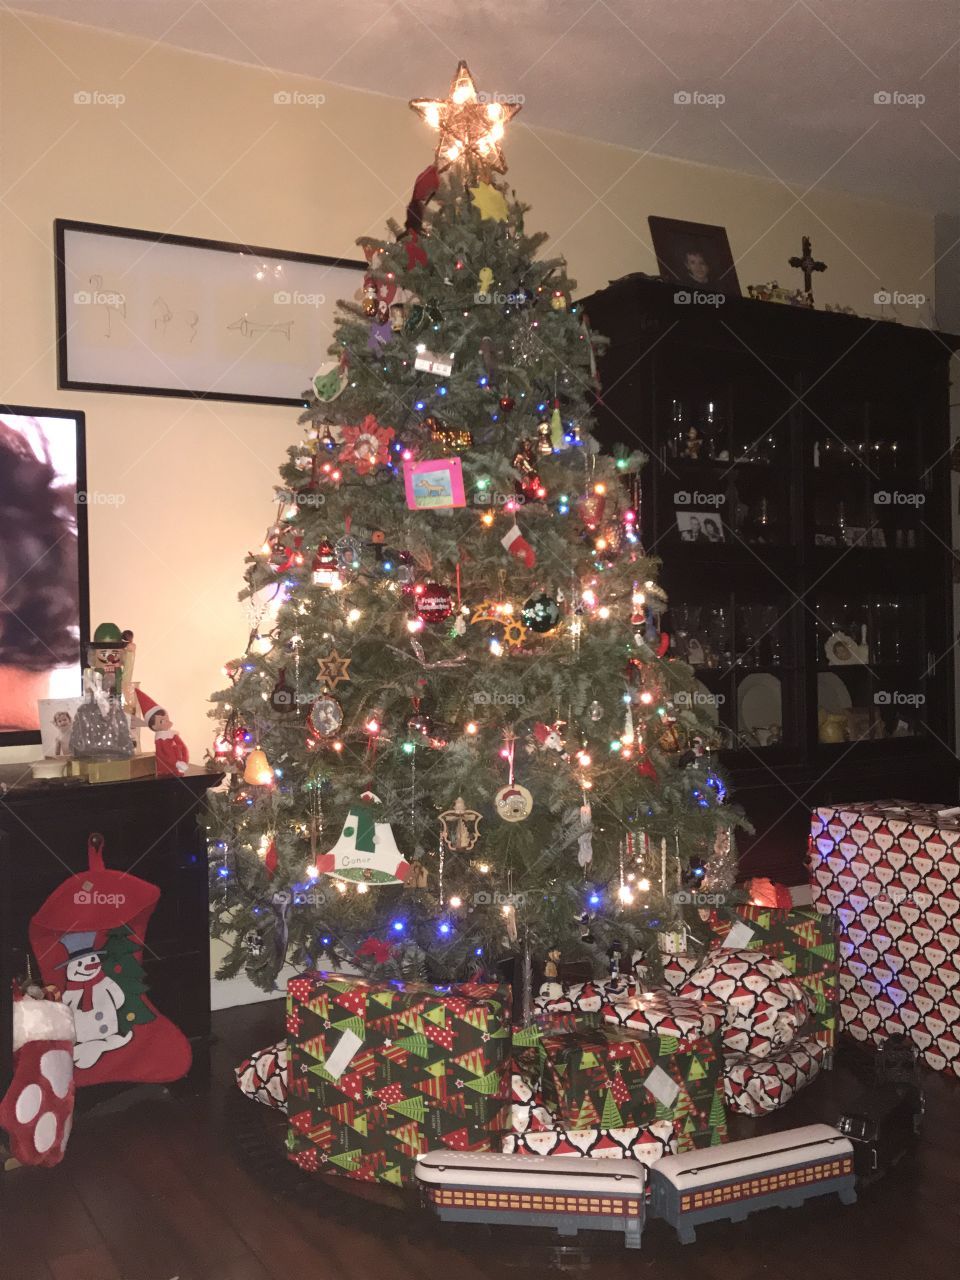 The real live tree, the array of ornaments spanning from obviously homemade to expensive, paired with the large gifts and darkish-light evening time vibe emulated from the wall’s slight contrast, this photo perfectly embodies a quiet family christmas